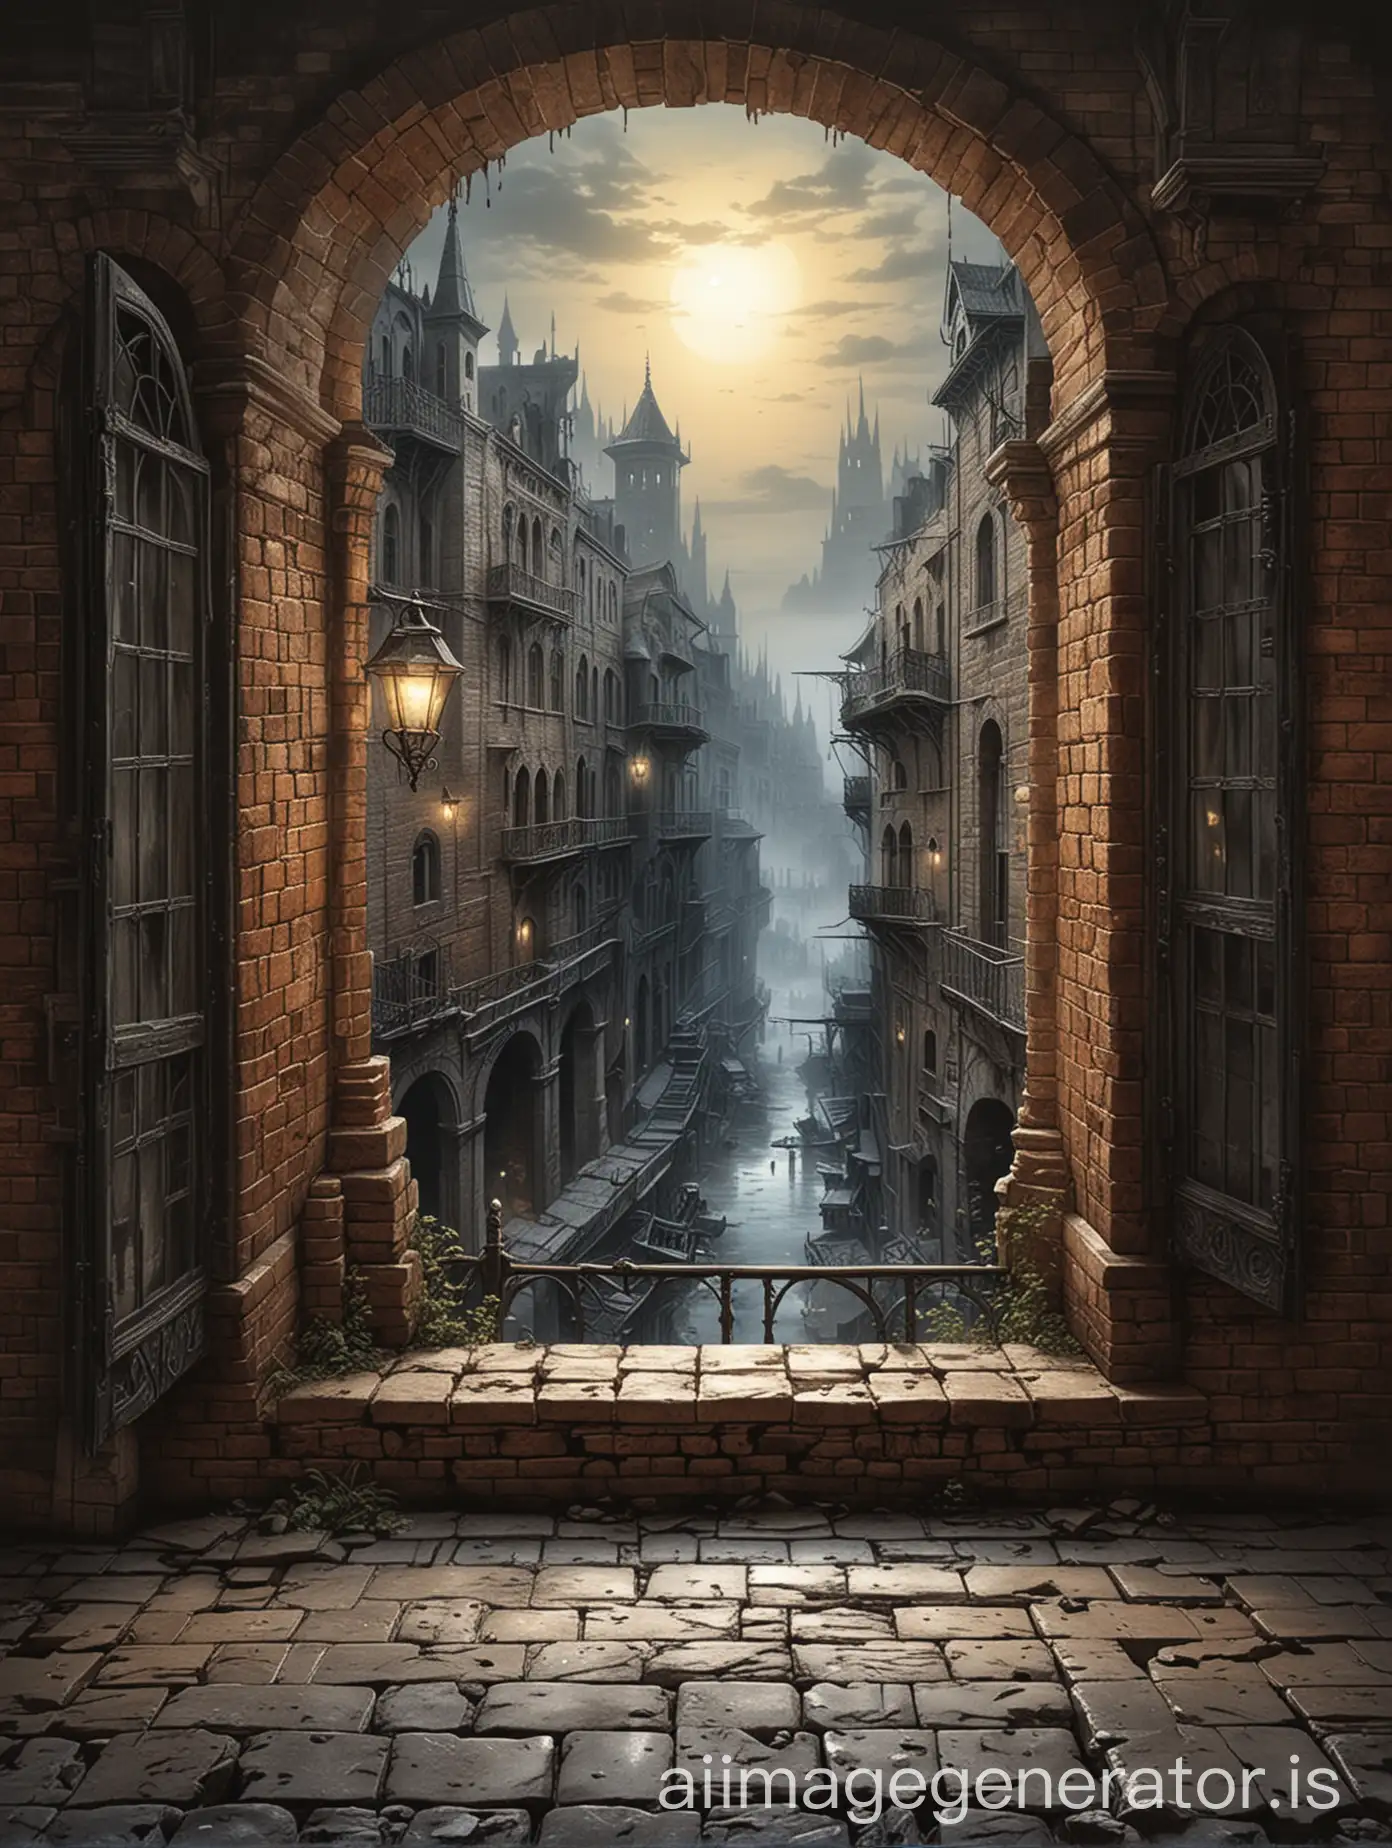 luis royo art style only background, ancient cityscape in the window, brickwall room, midnight backlight,  brickfloor